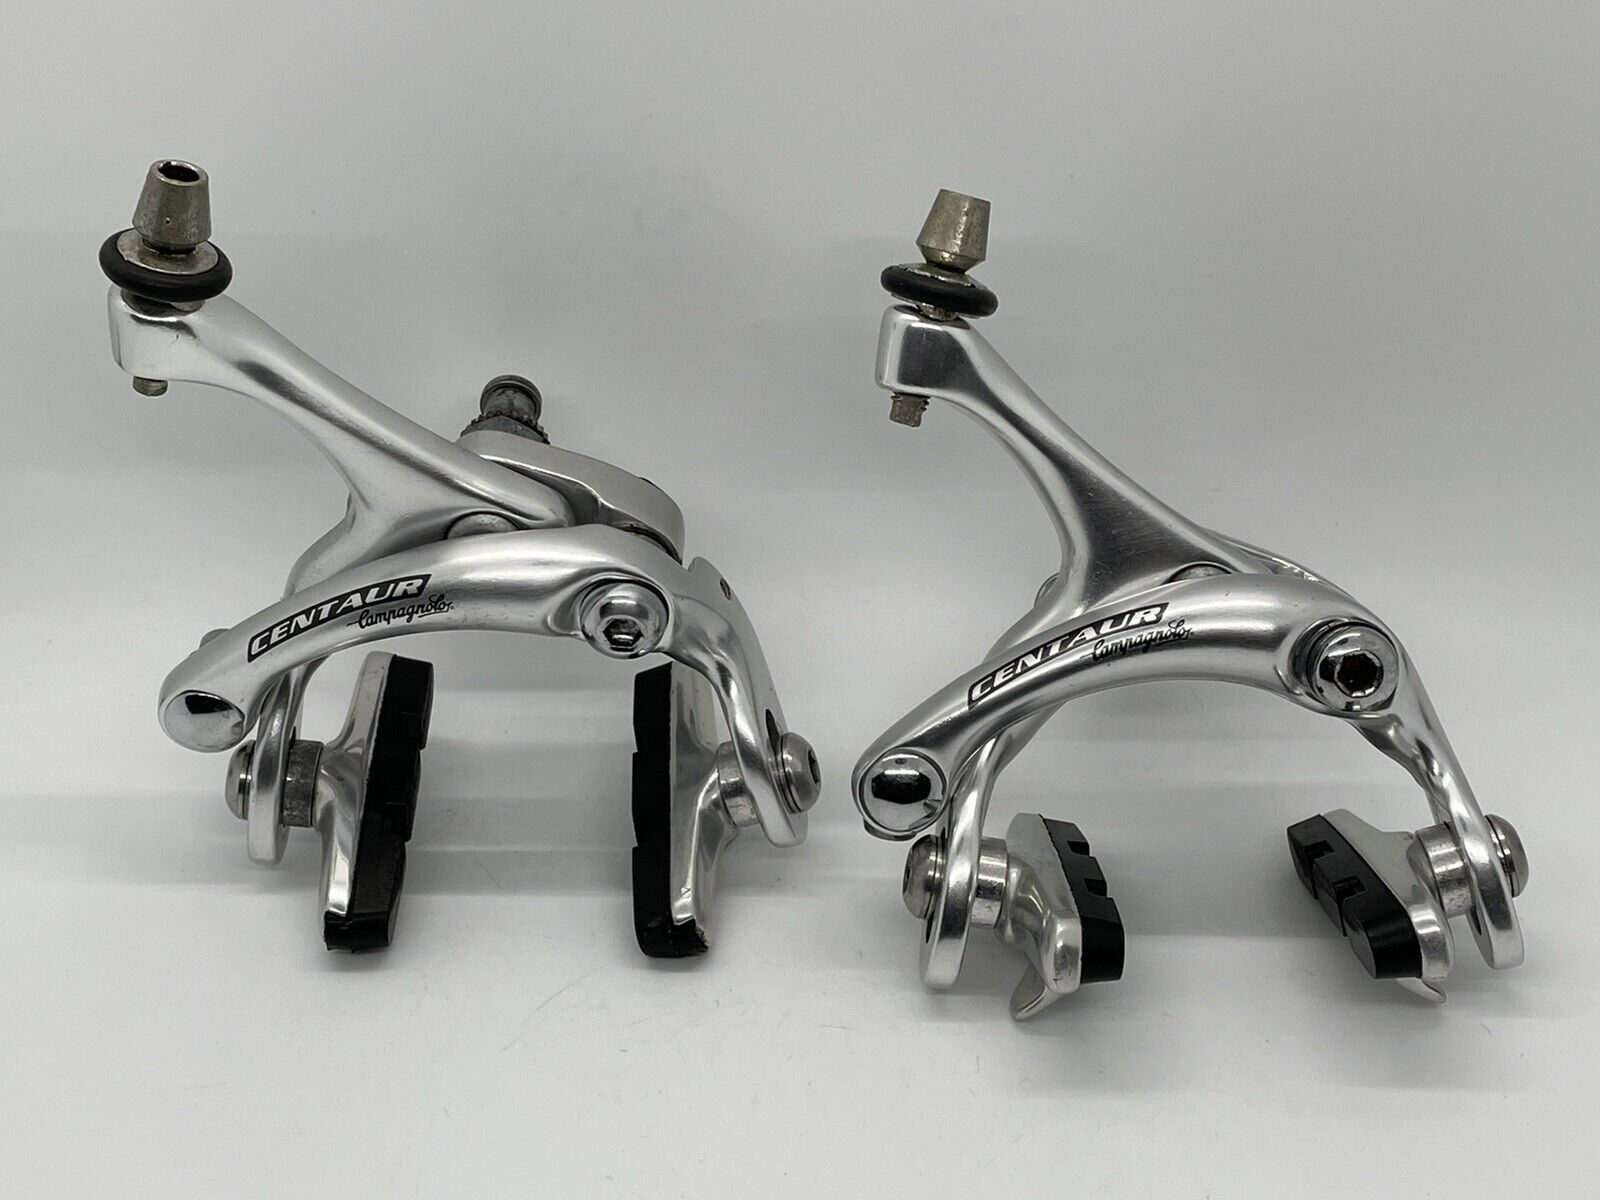 CLASSIC Campagnolo CENTAUR Silver Sale Safety and trust price Alloy Front Brake Caliper Set